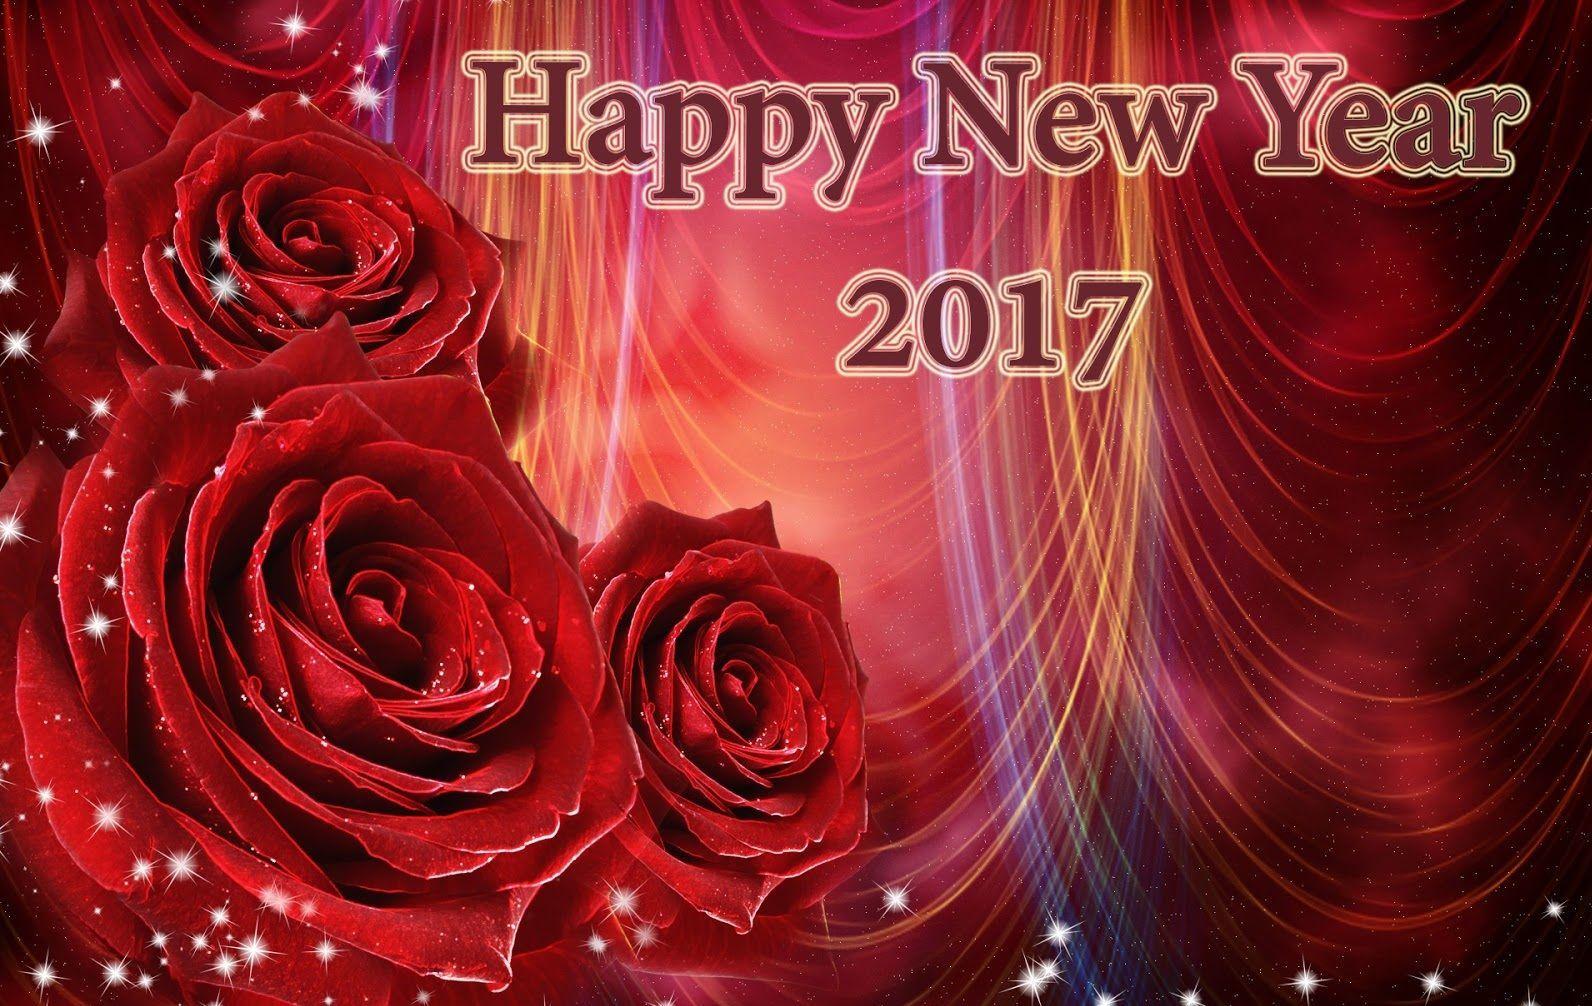 Celebrate New Year with Happy New Year HD Wallpaper 2017